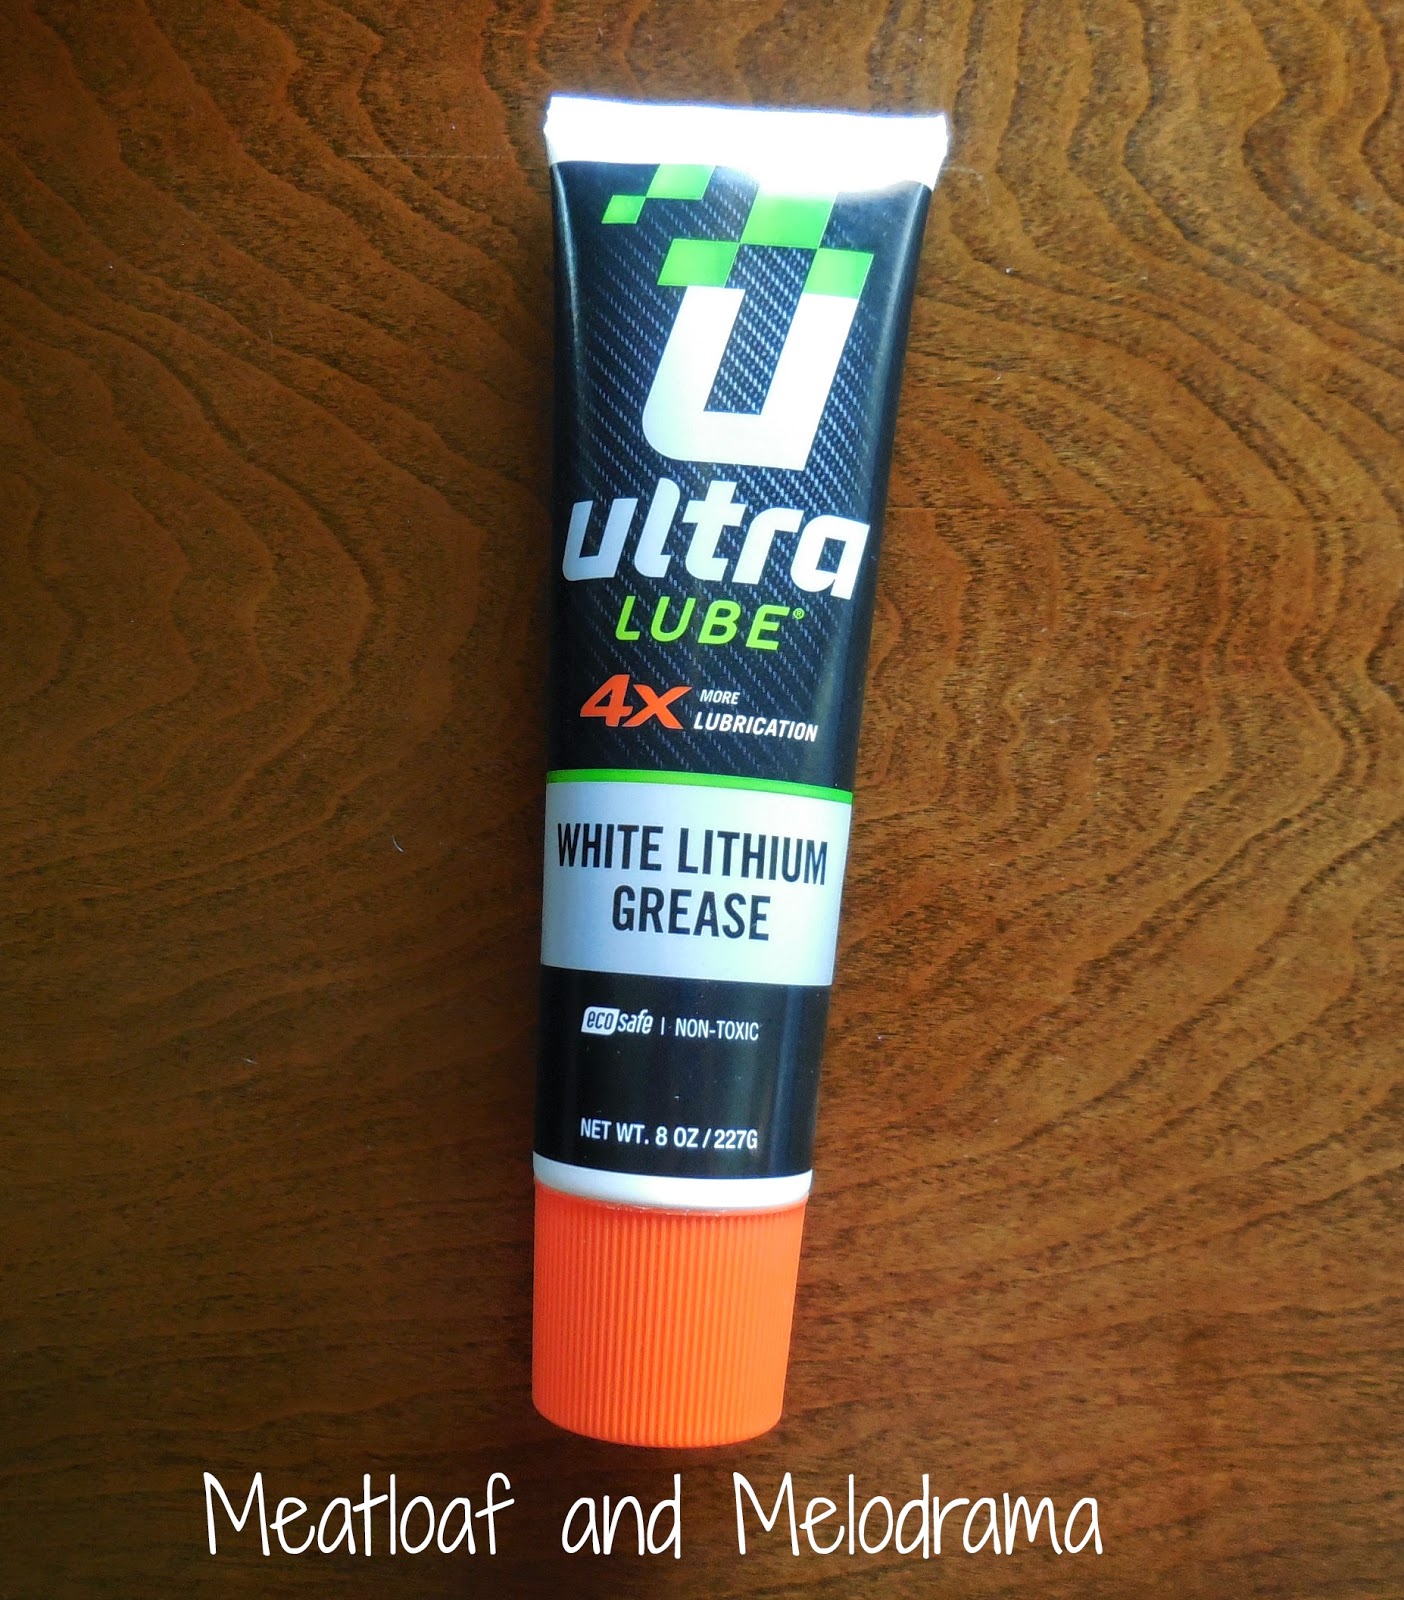 Ultra Lube white lithium grease on sliding glass door